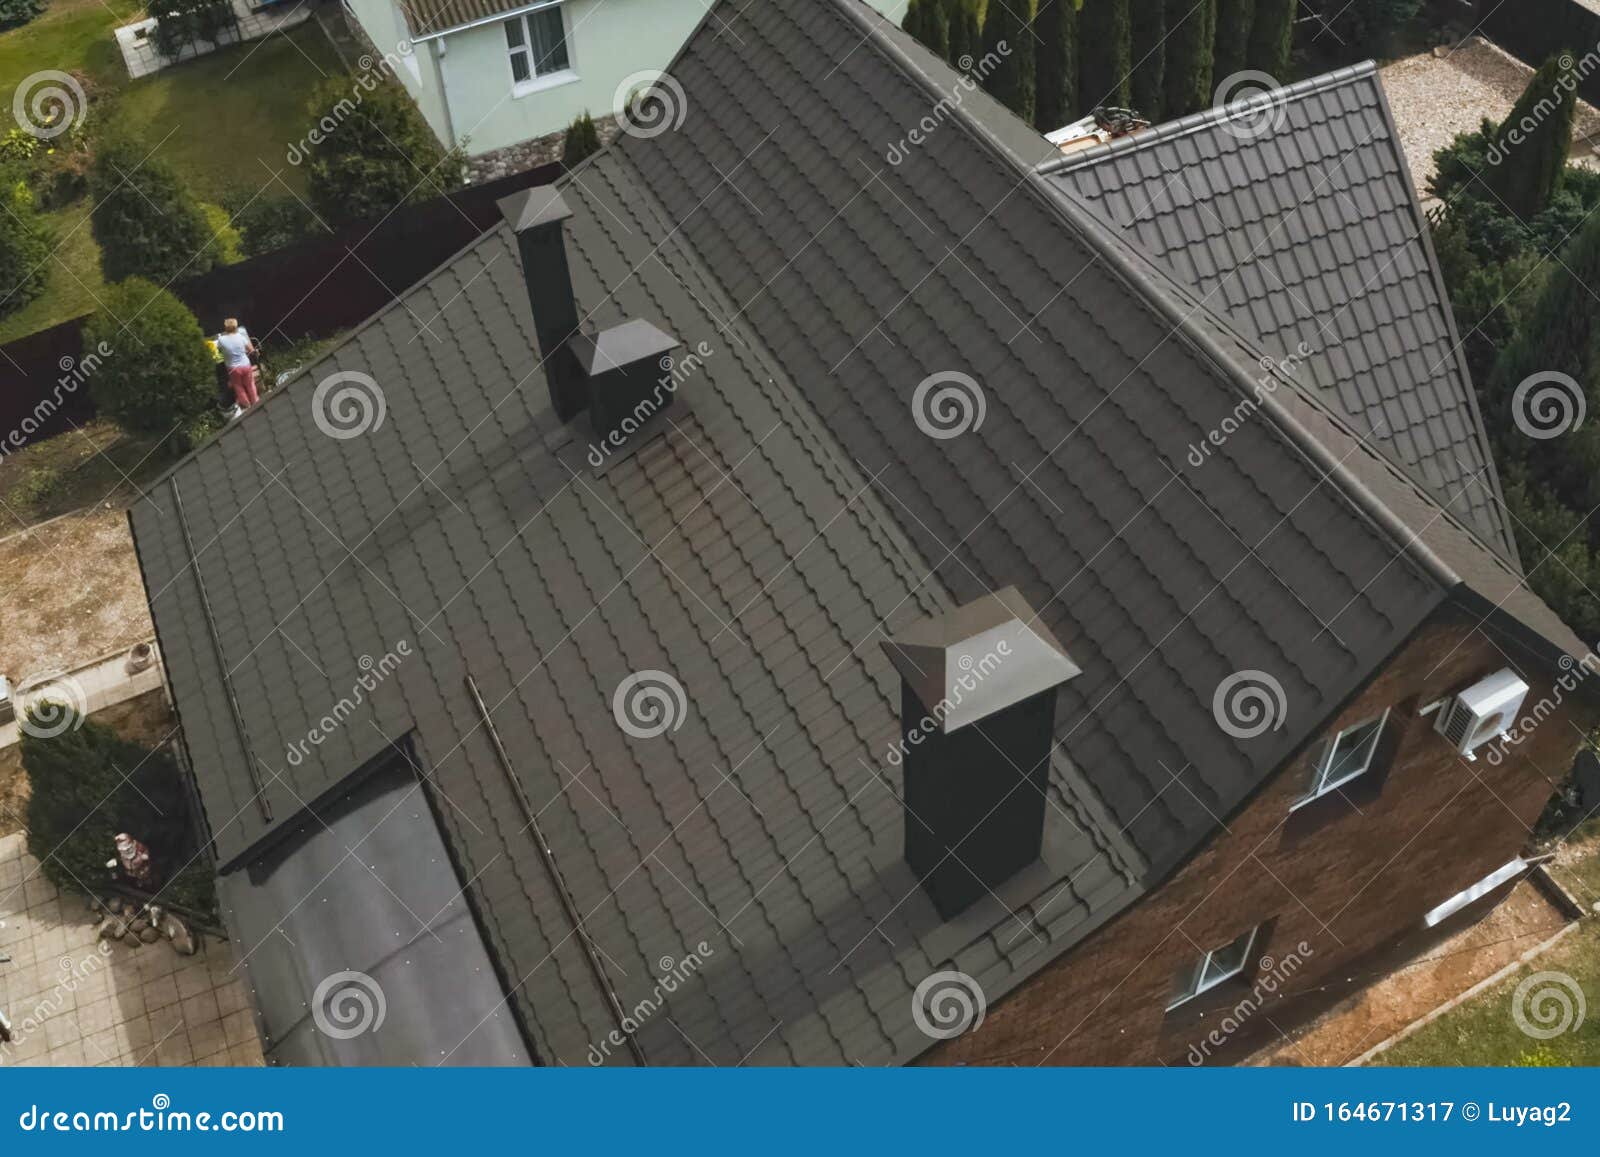 House With A Brown Metal Roof.Corrugated Metal Roof And Metal Ro Stock Image Image of attic